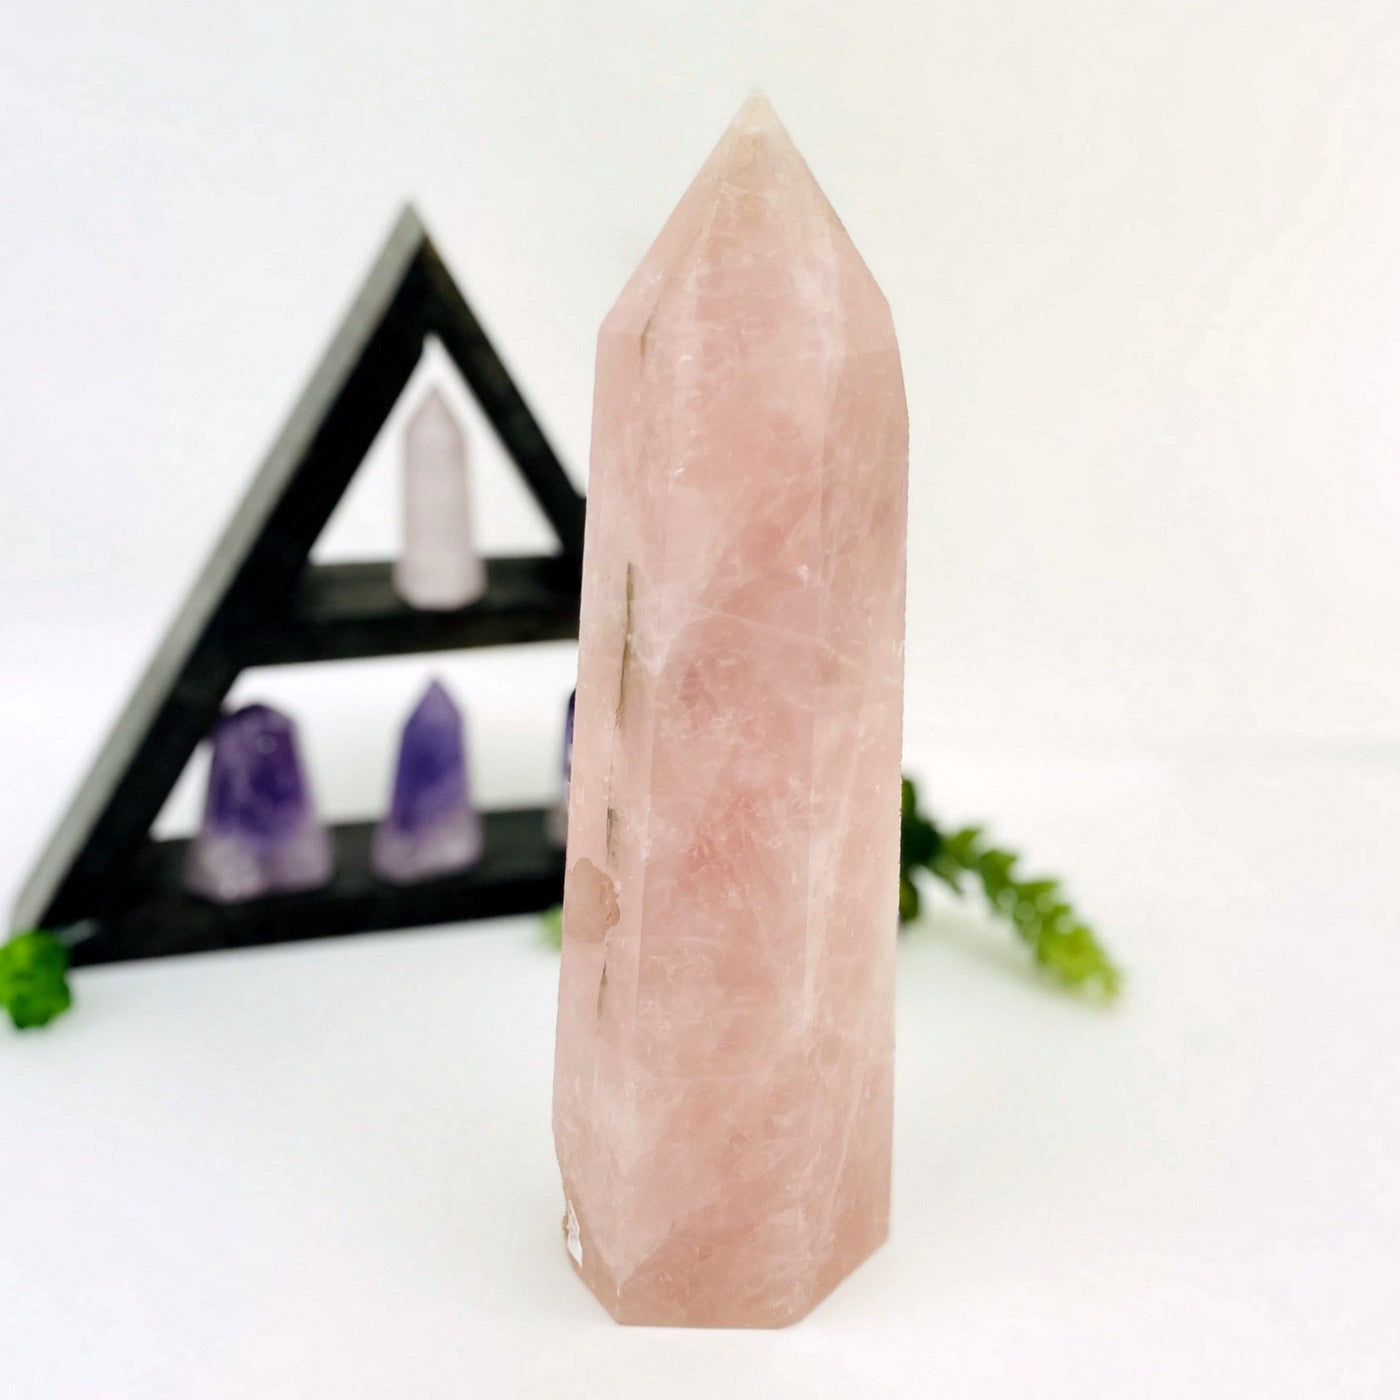 Rose Quartz Polished Point Stone with triangular display with crystals blurred on white background